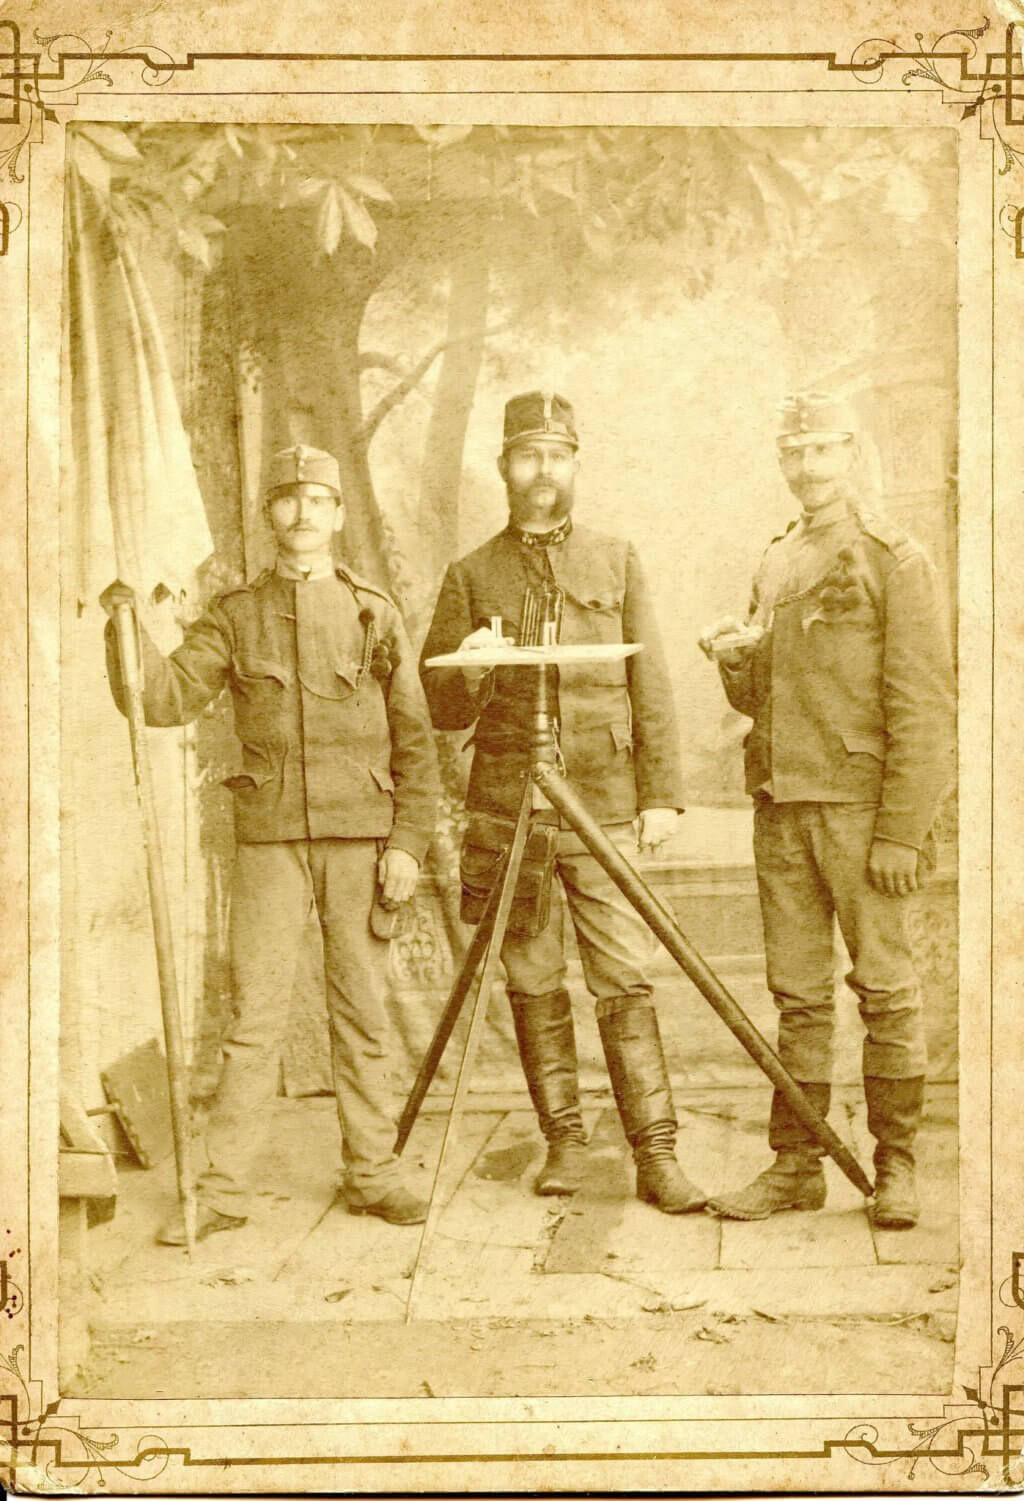 Military land surveyors in 1891